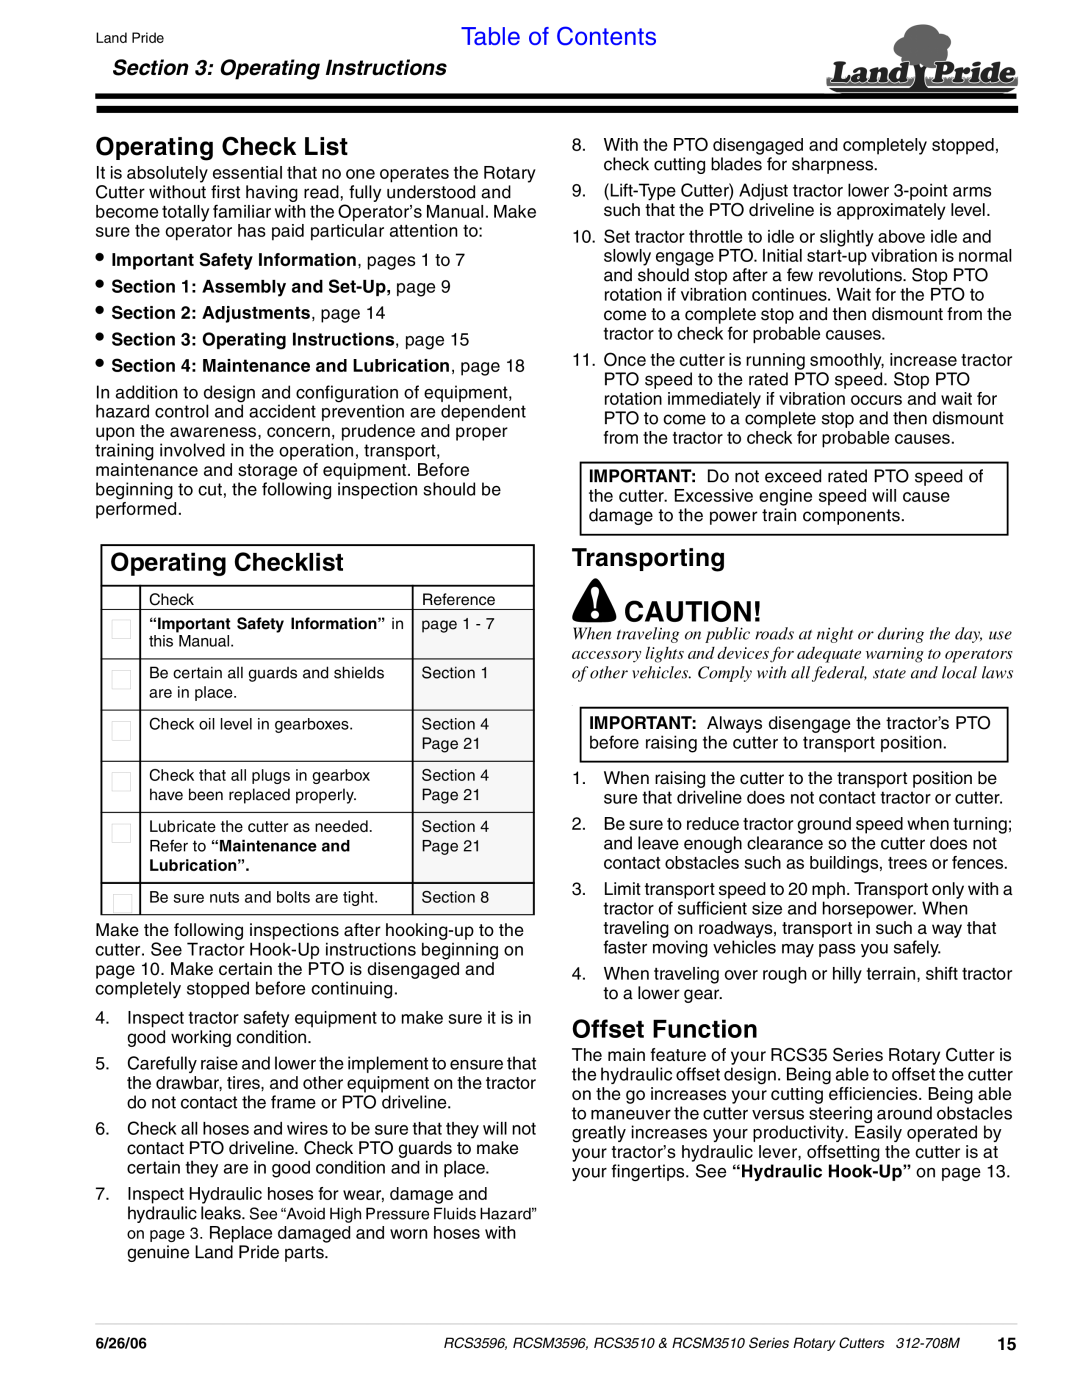 Land Pride RCS3596 manual Operating Check List, Operating Checklist, Transporting, Offset Function, Operating Instructions 